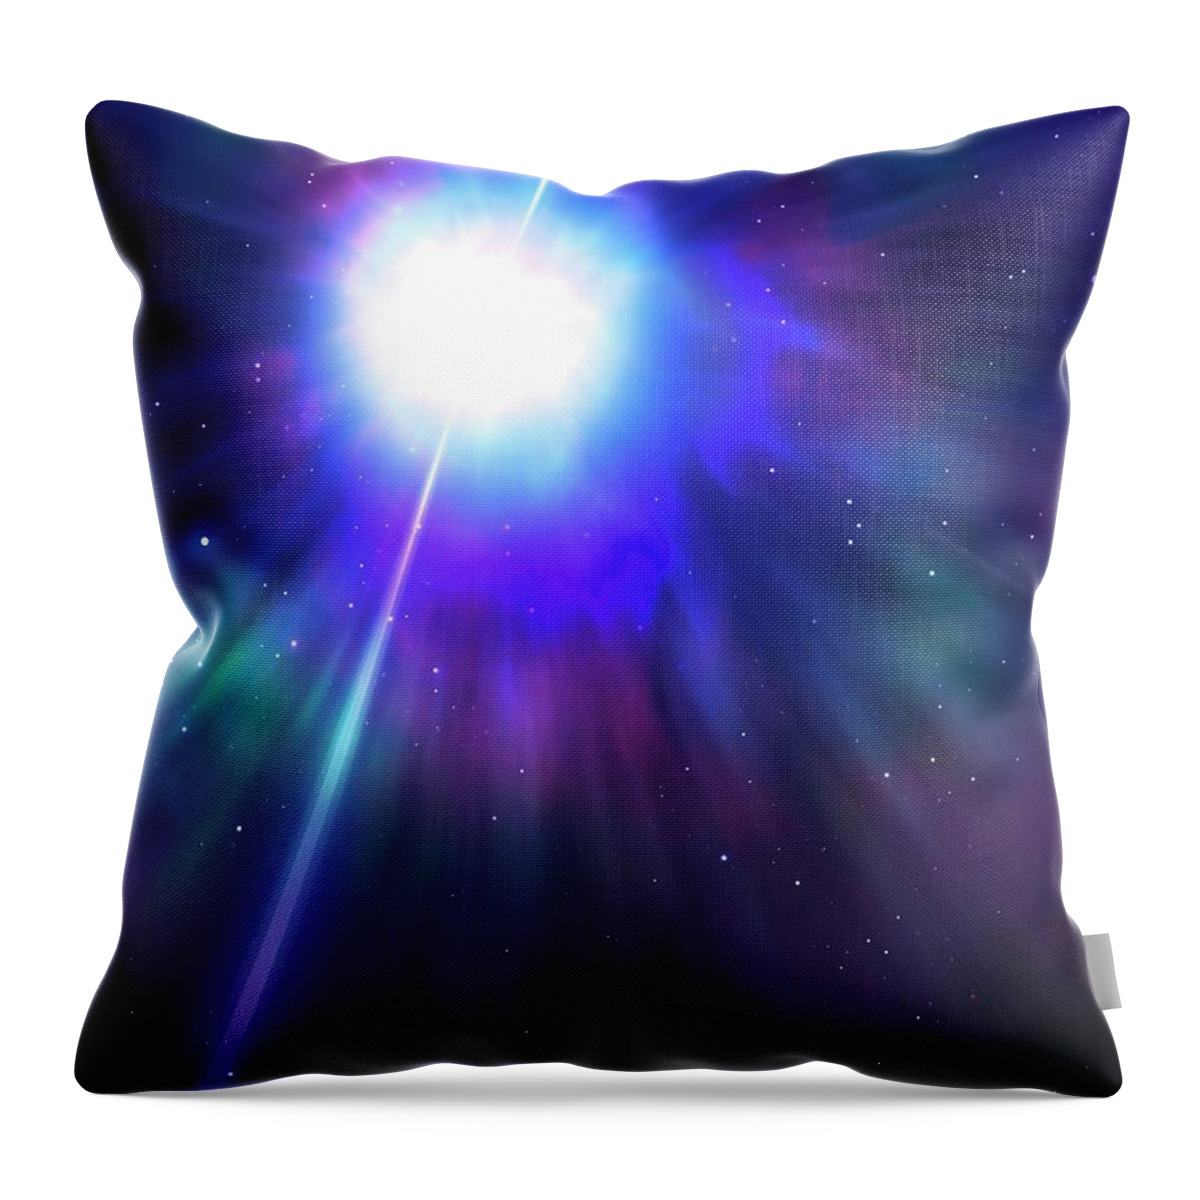 Concepts & Topics Throw Pillow featuring the digital art Artwork Of A Gamma-ray Burster by Mark Garlick